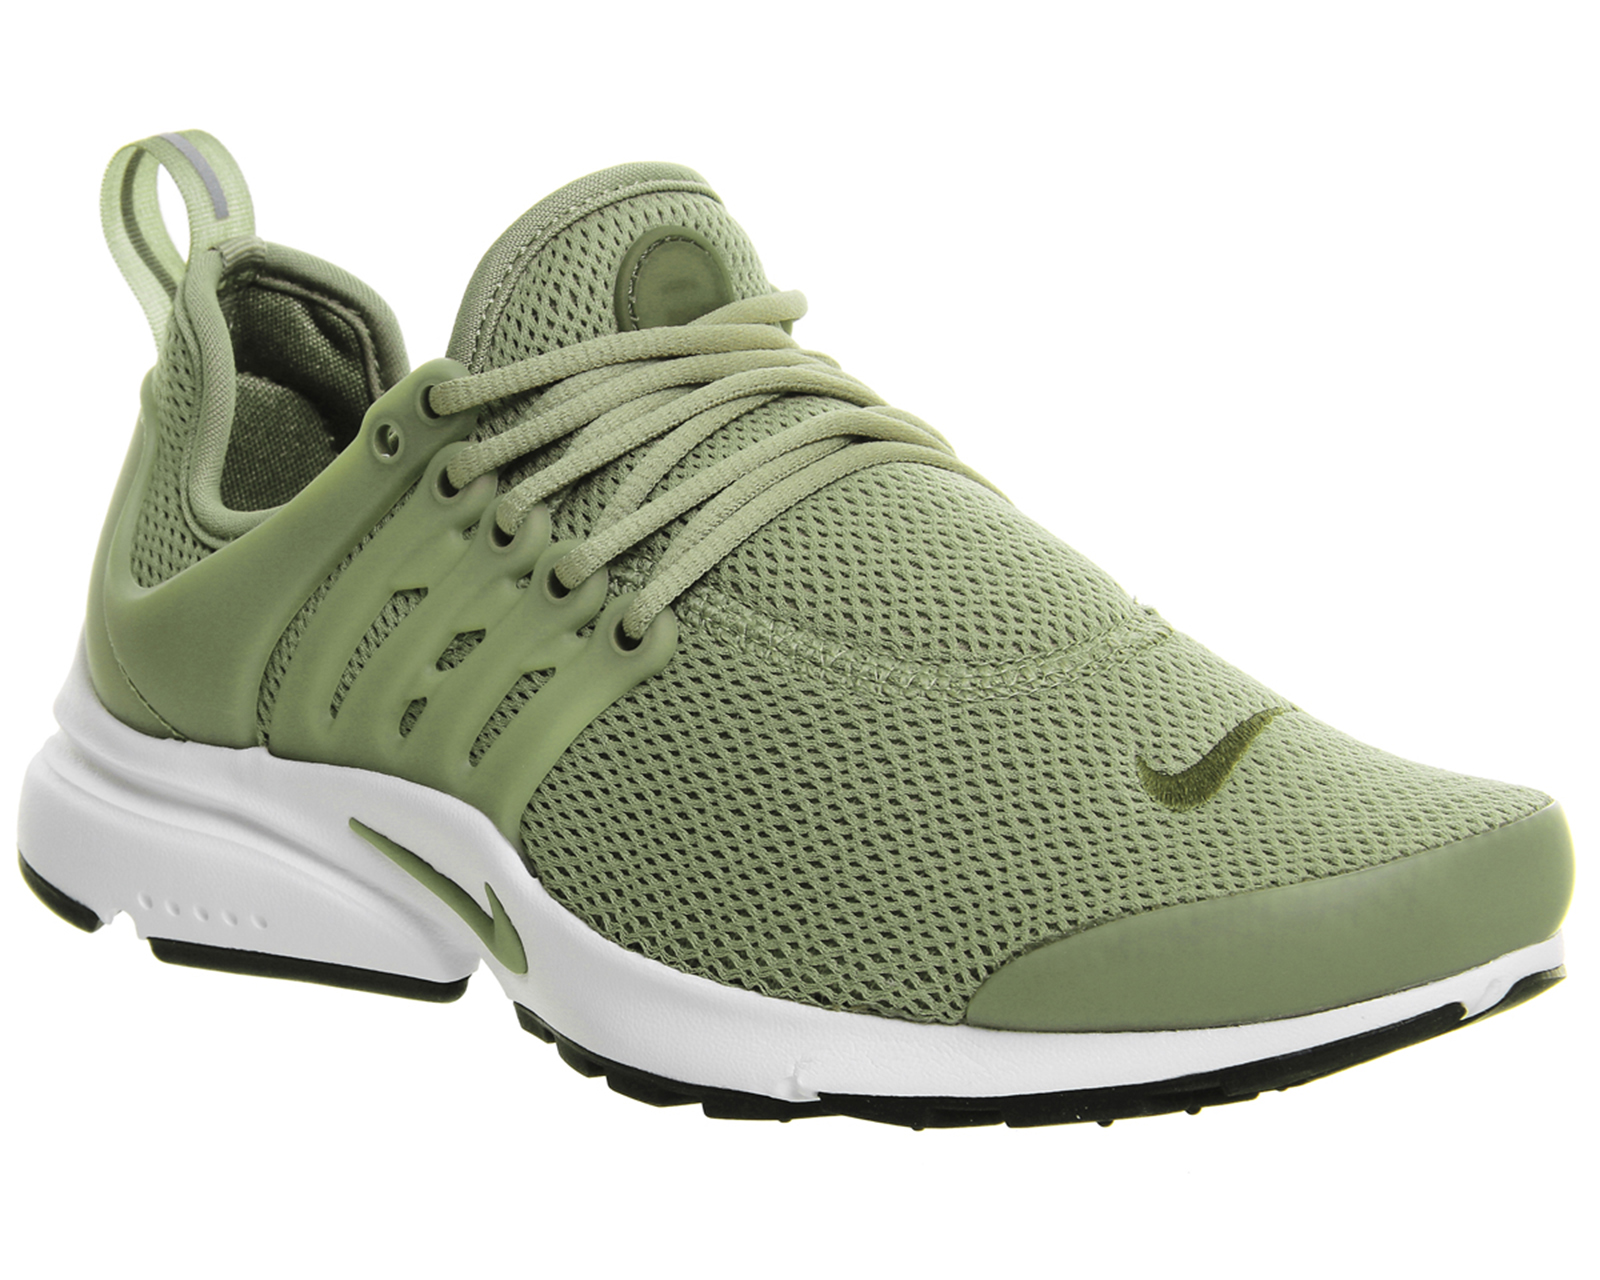 Nike Air Presto Womens Trainers Palm Green - Hers trainers